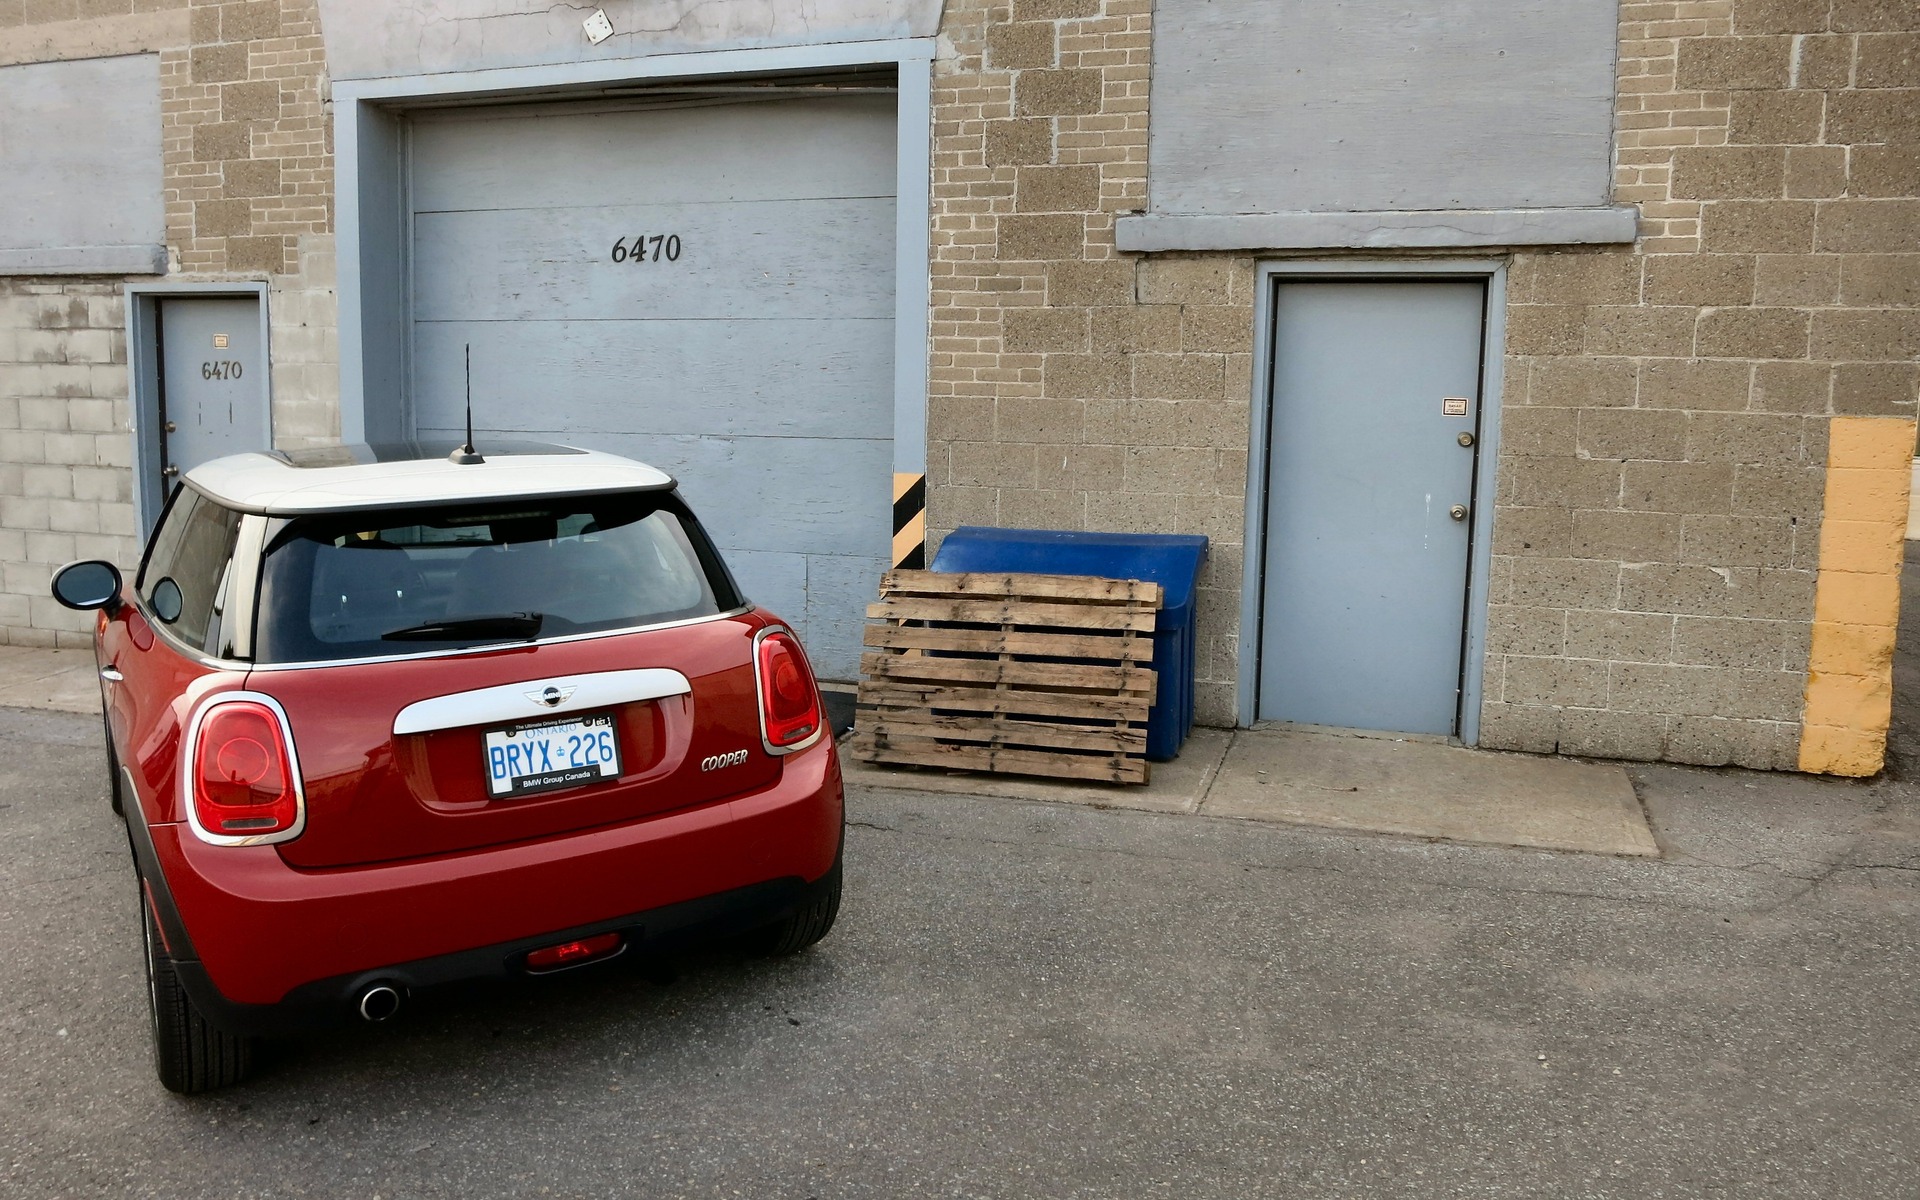 The 2014 MINI Cooper finds itself performing a delicate balancing act.